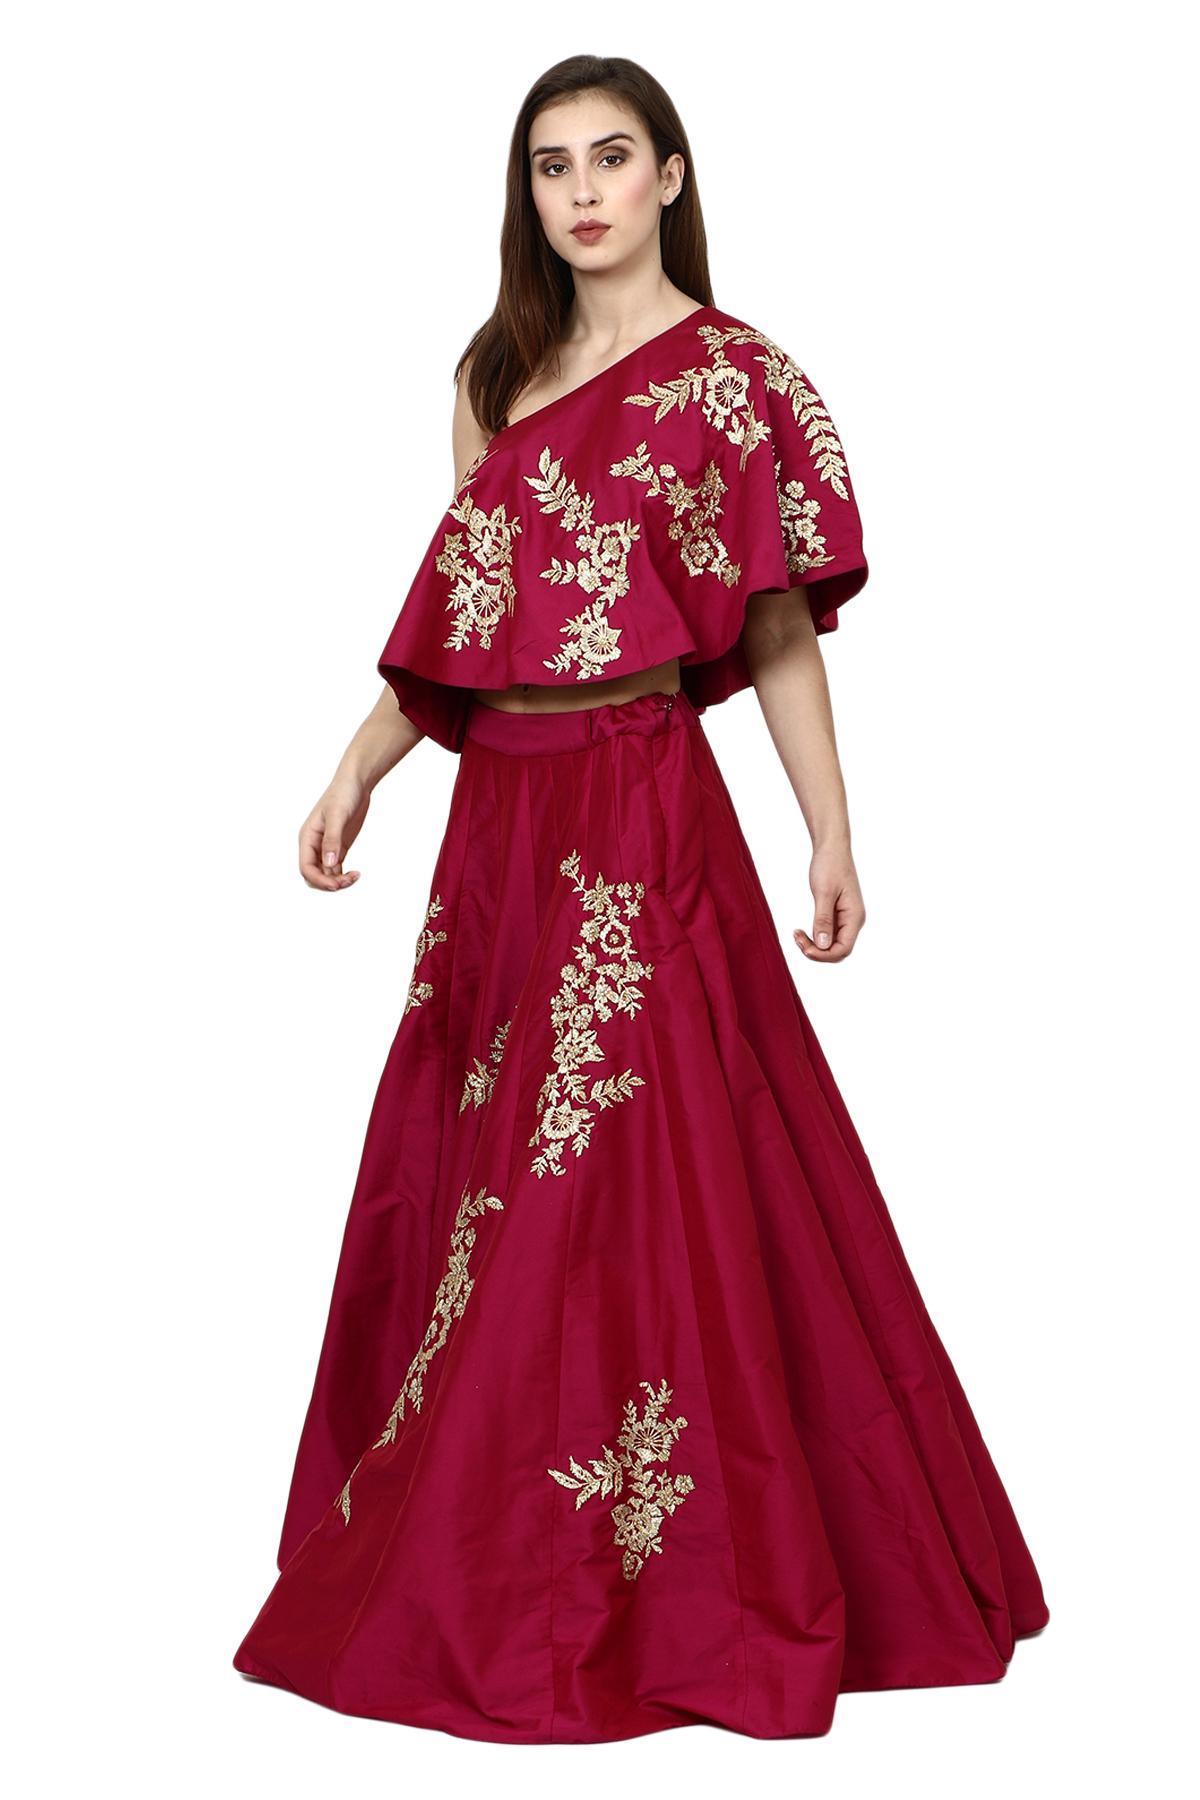 Buy KD Fashion Women's and Girls' Traditional Crop Top in Silk Fabric  Wedding Dress with Embroidery and Dupatta Fashionable Latest Fancy Trends  at Amazon.in